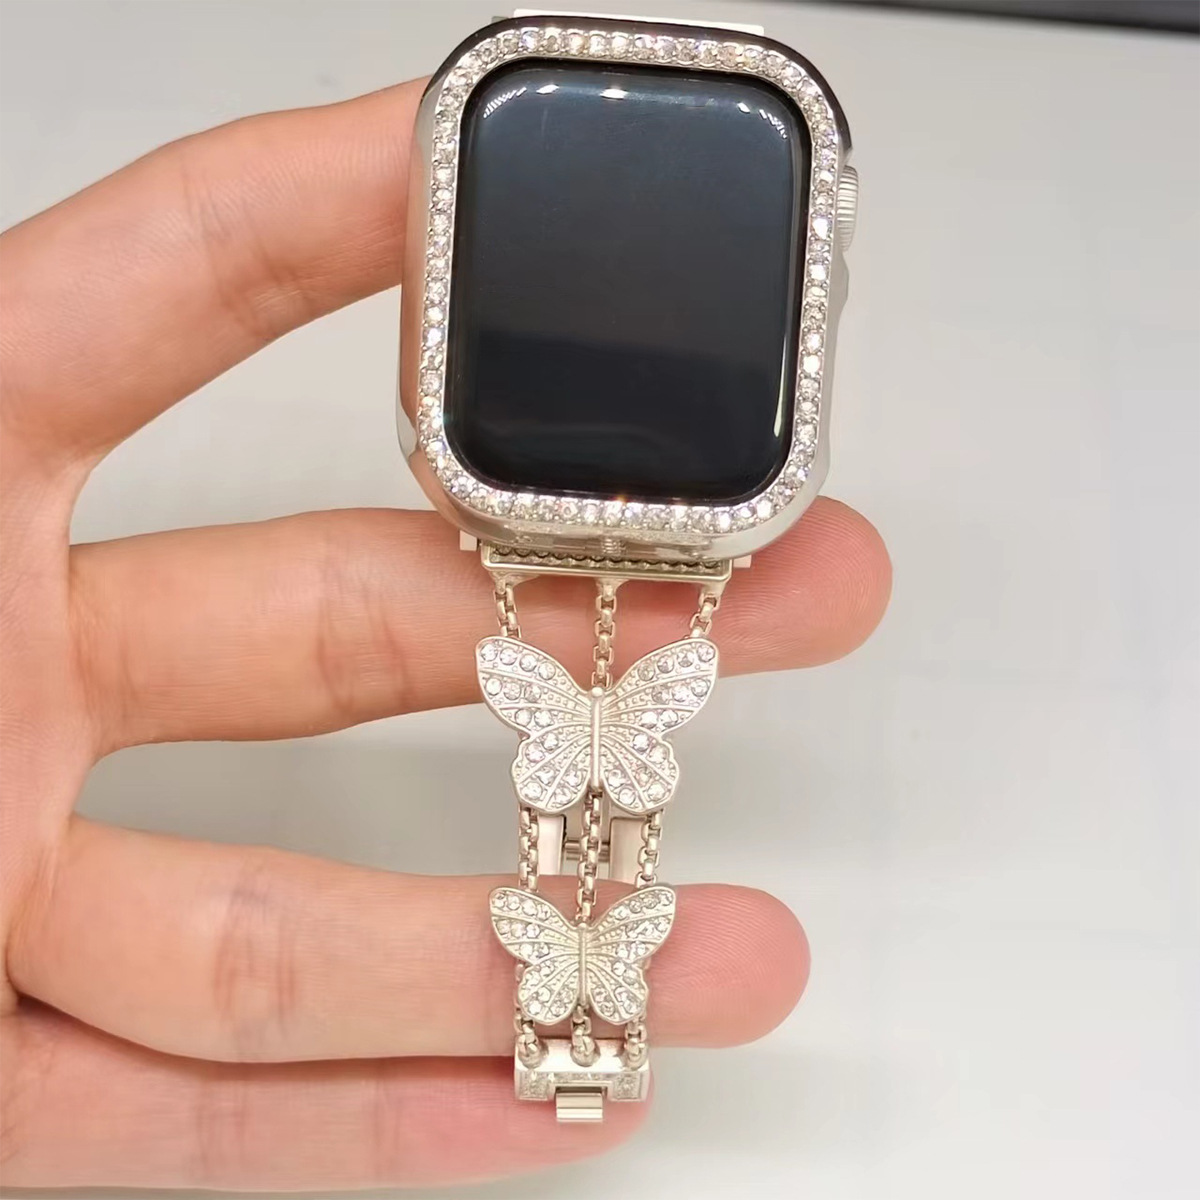 Convenient Detachable Folding Clasp iWatch Watch Band with Small Butterfly Metal and Diamond Accents